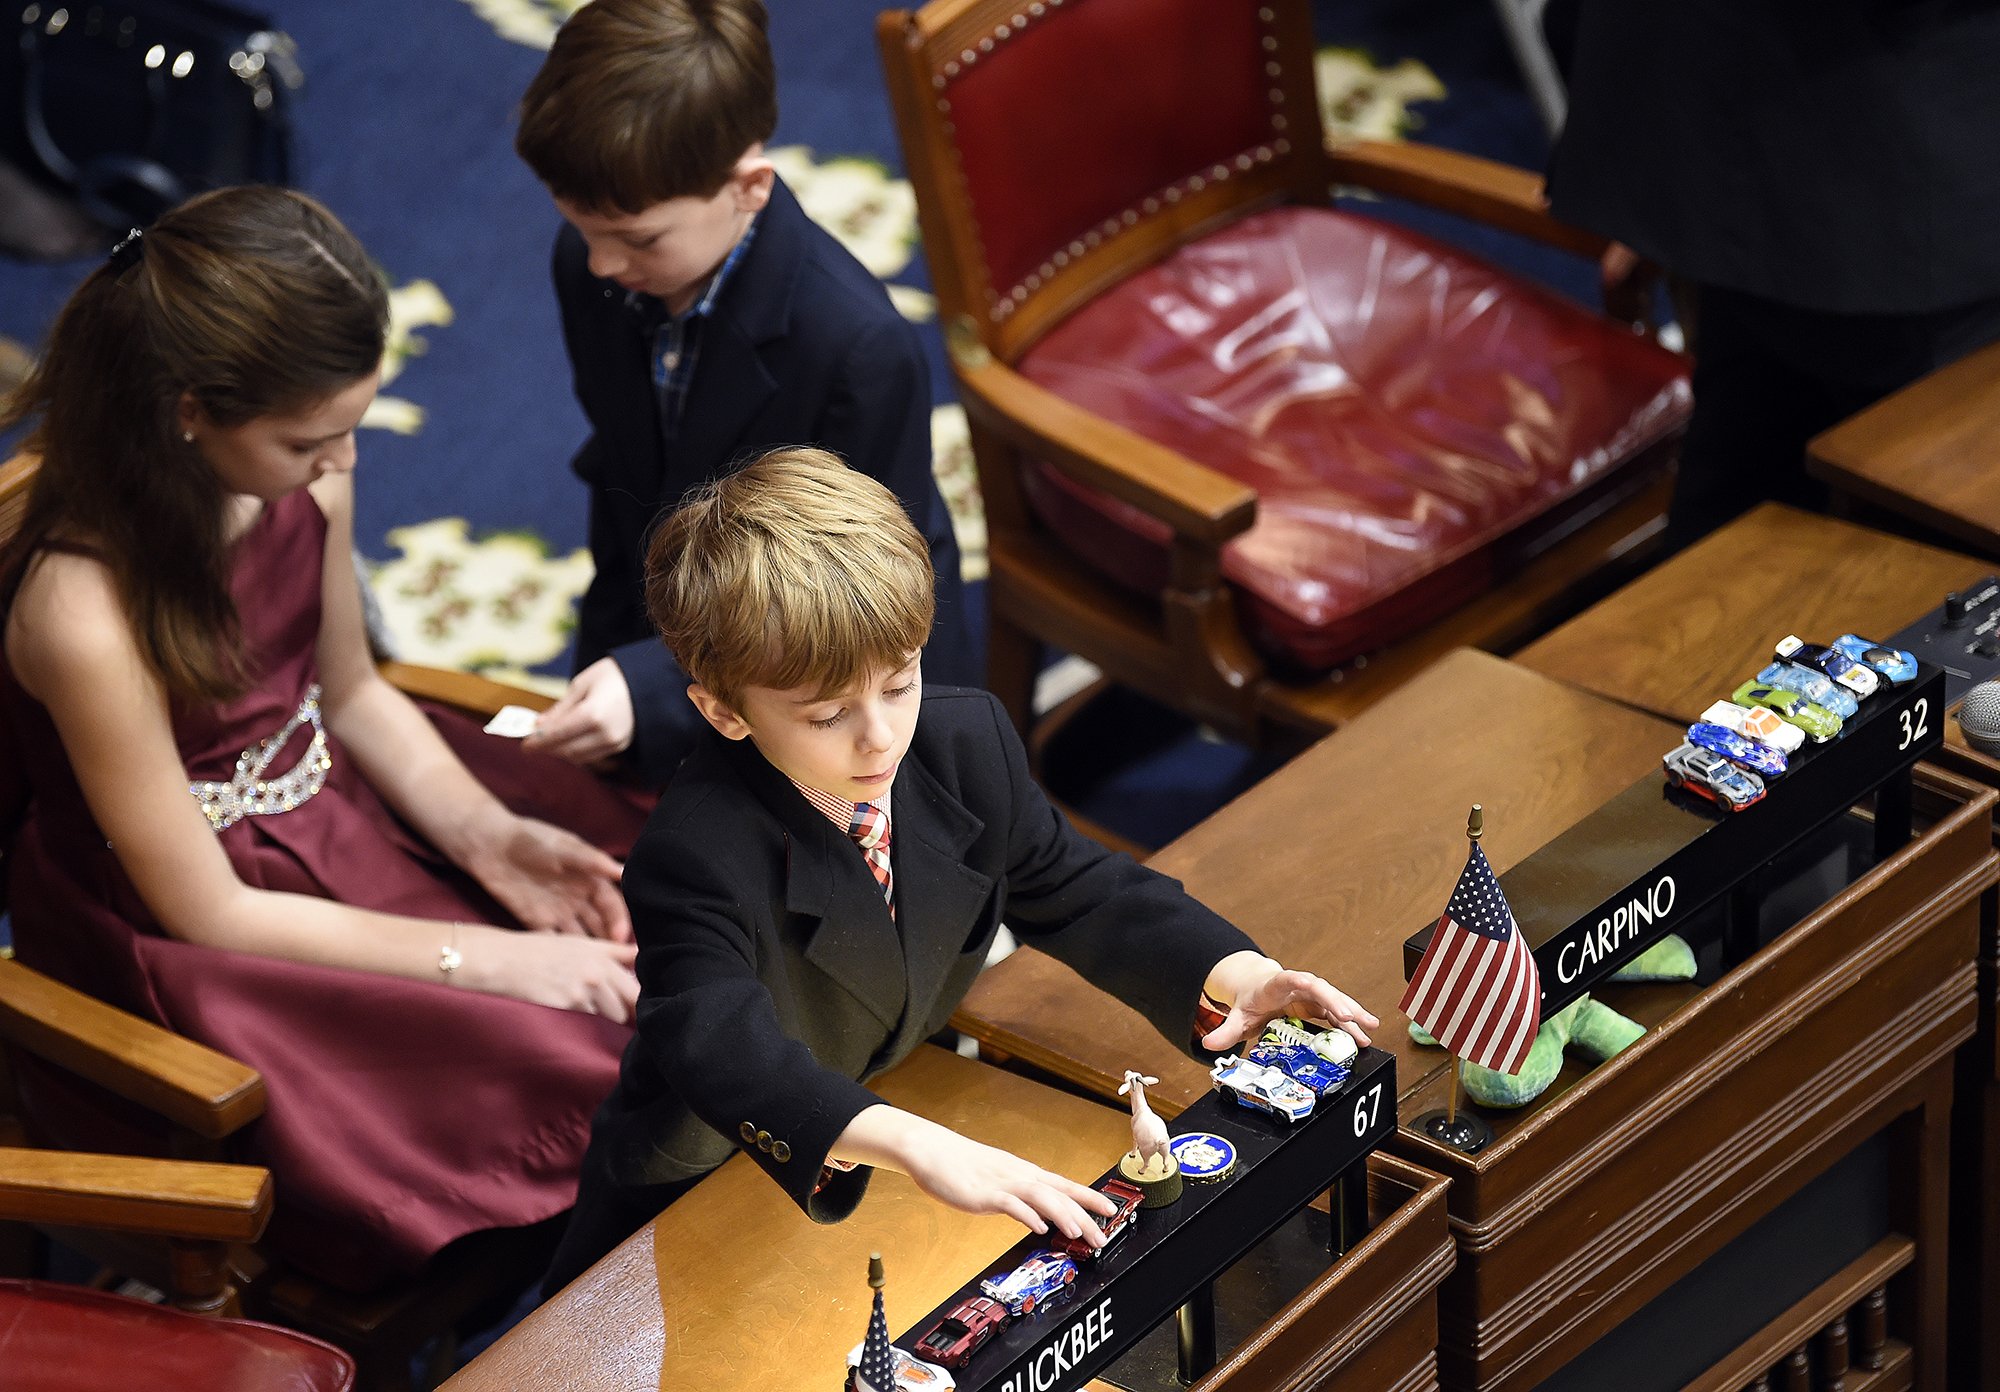  William Petit III, 4, of Guilford, plays with toys during a break in session for the State Representatives where his father William Petit represents the 22nd district during the opening of the Connecticut General Assembly session for 2020 on Wednesd